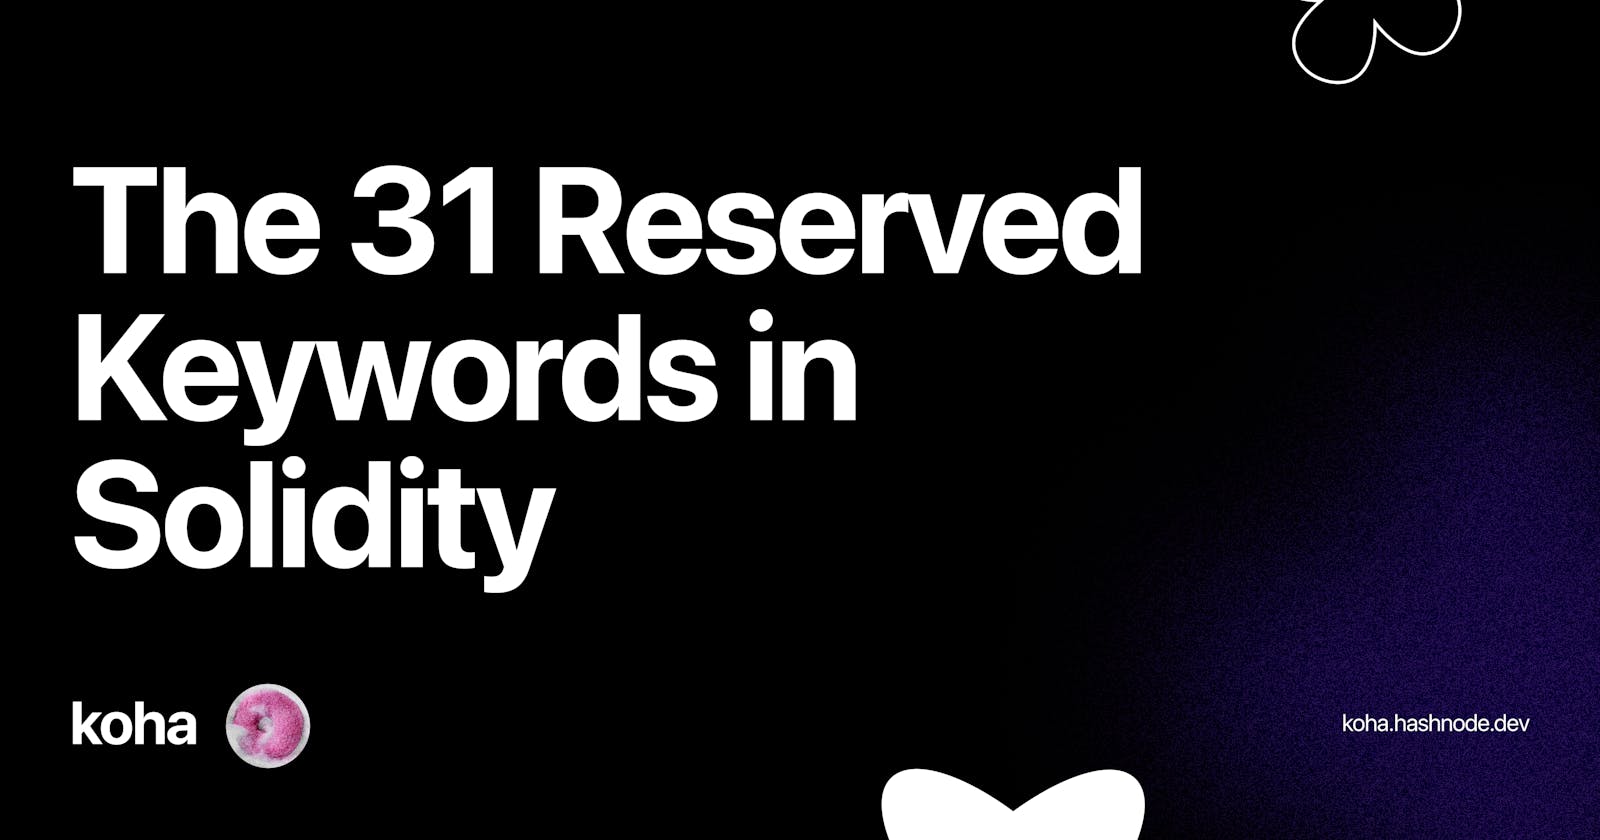 The 31 Reserved Keywords in Solidity